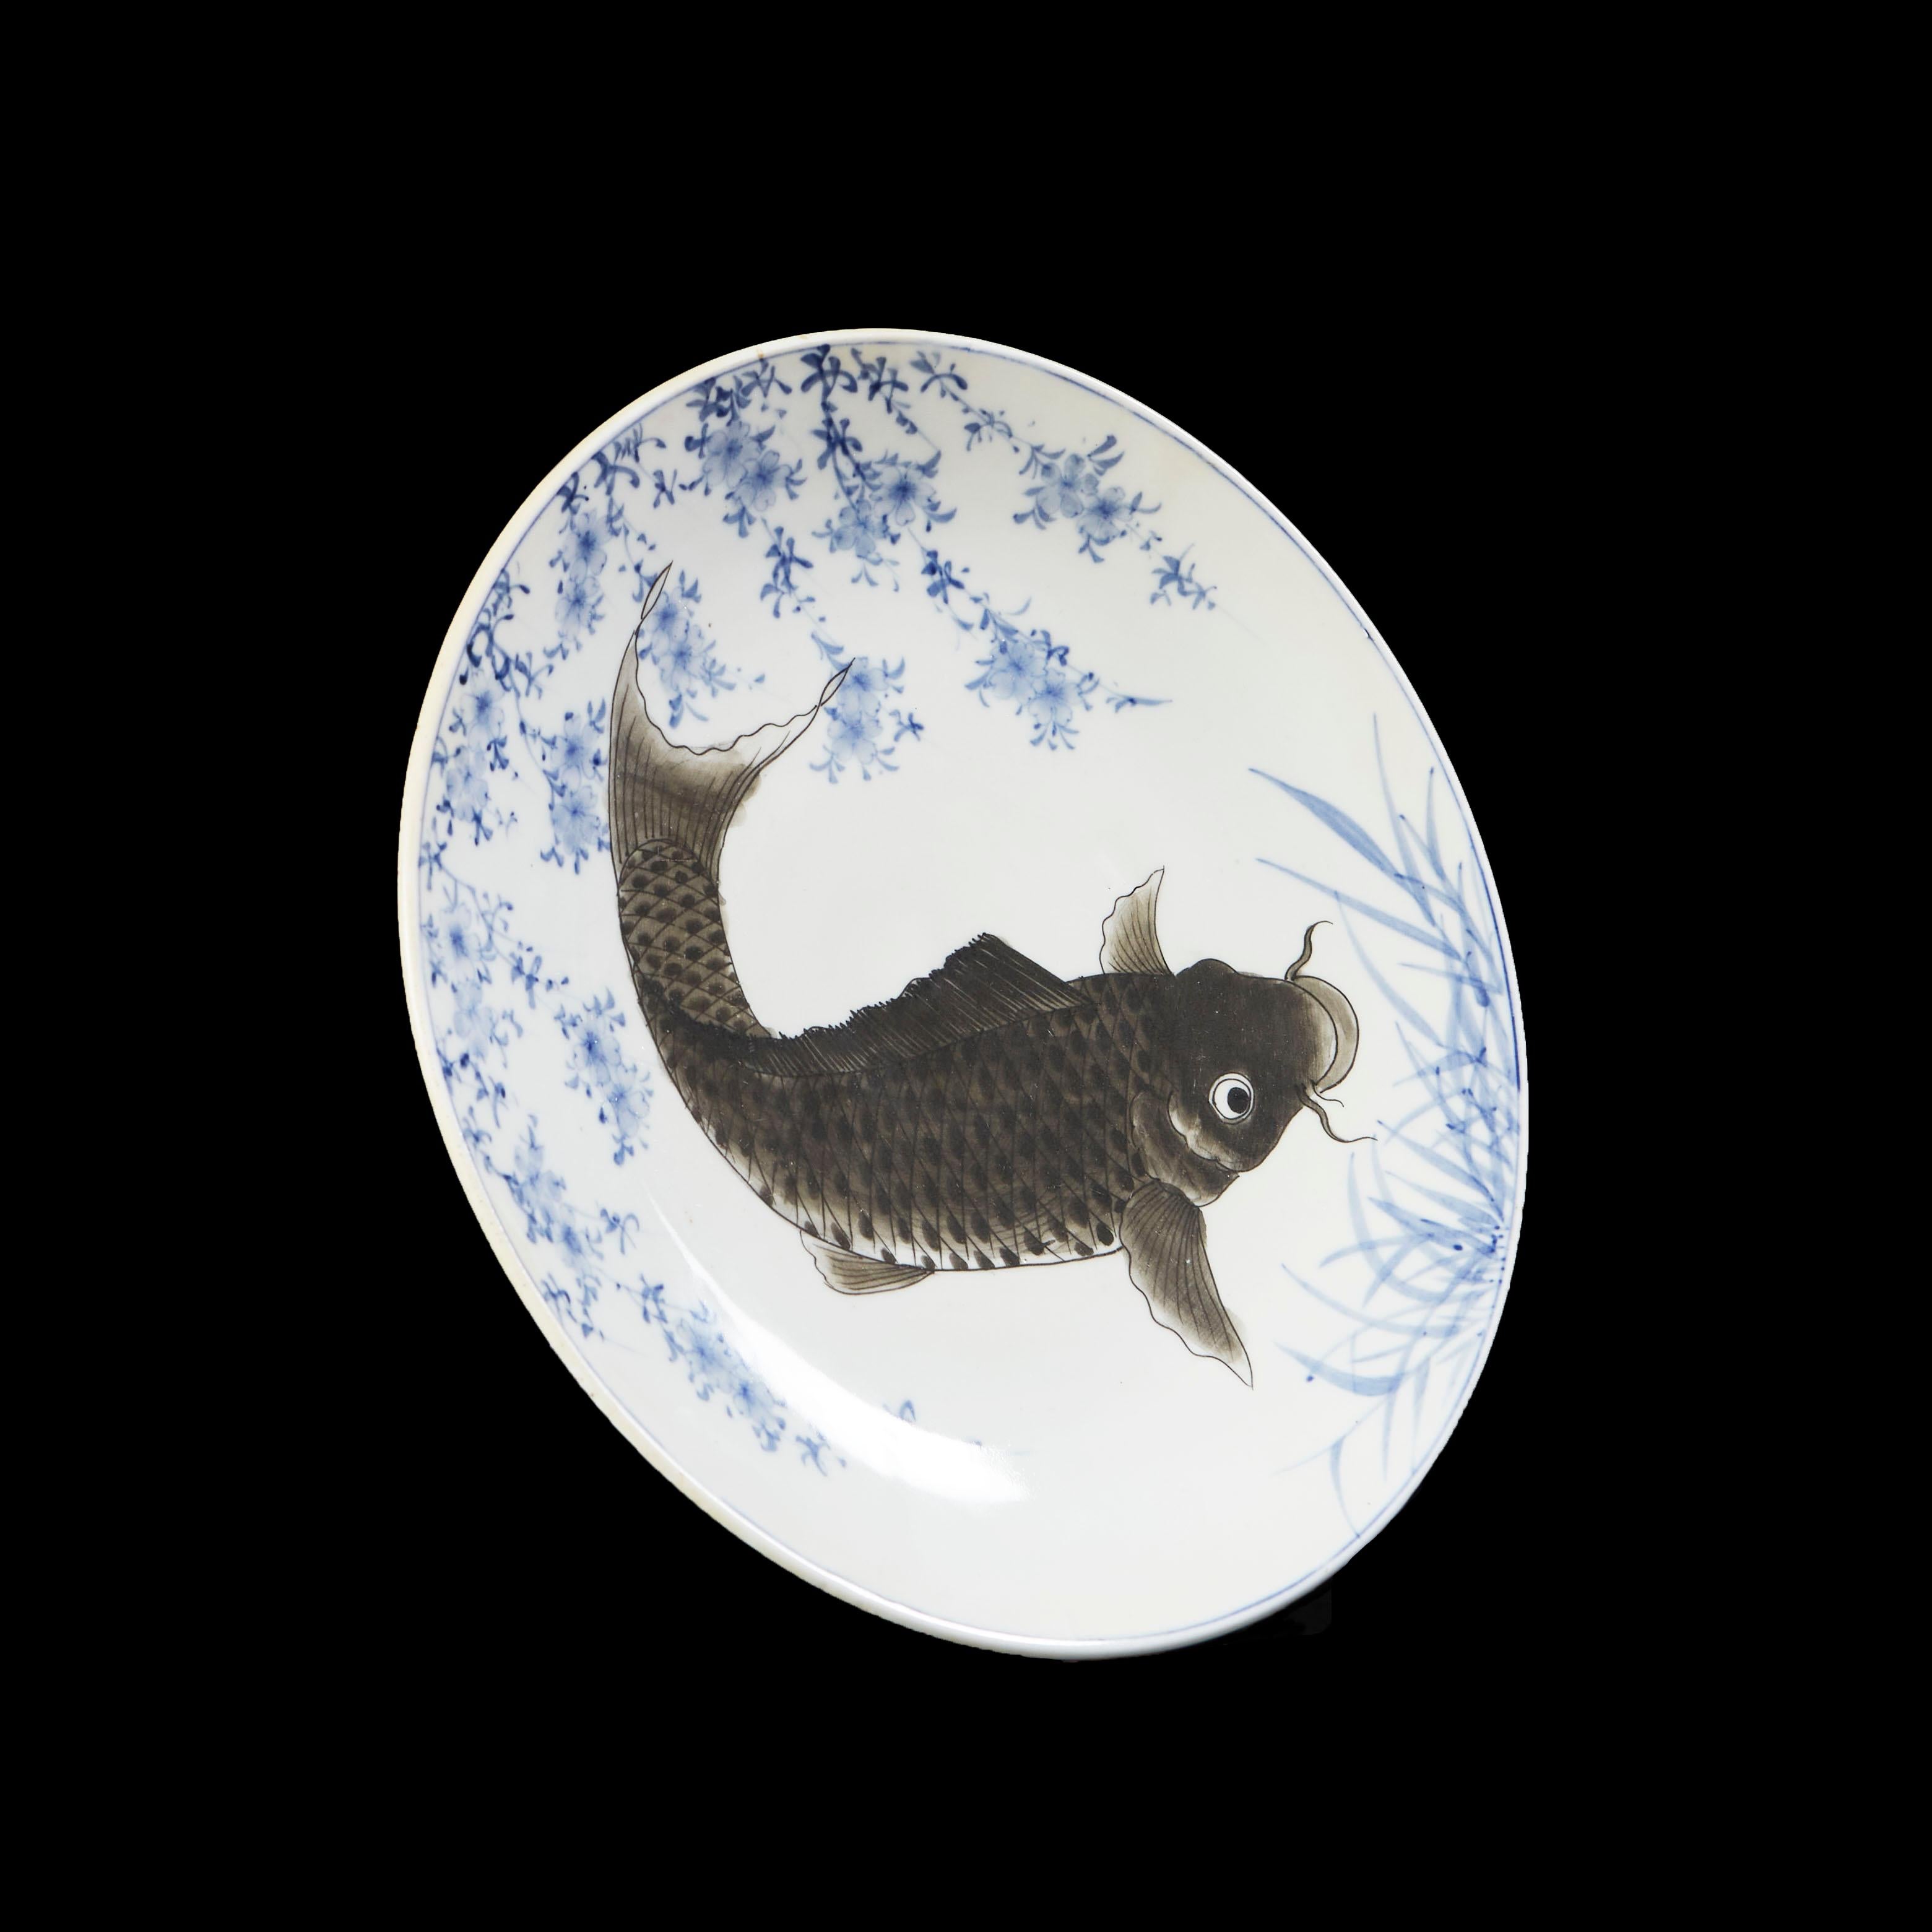 A fine late nineteenth century Japanese charger, with swimming decorative carp with whiskers and painted scales, swimming amongst blue reeds on a white ground.